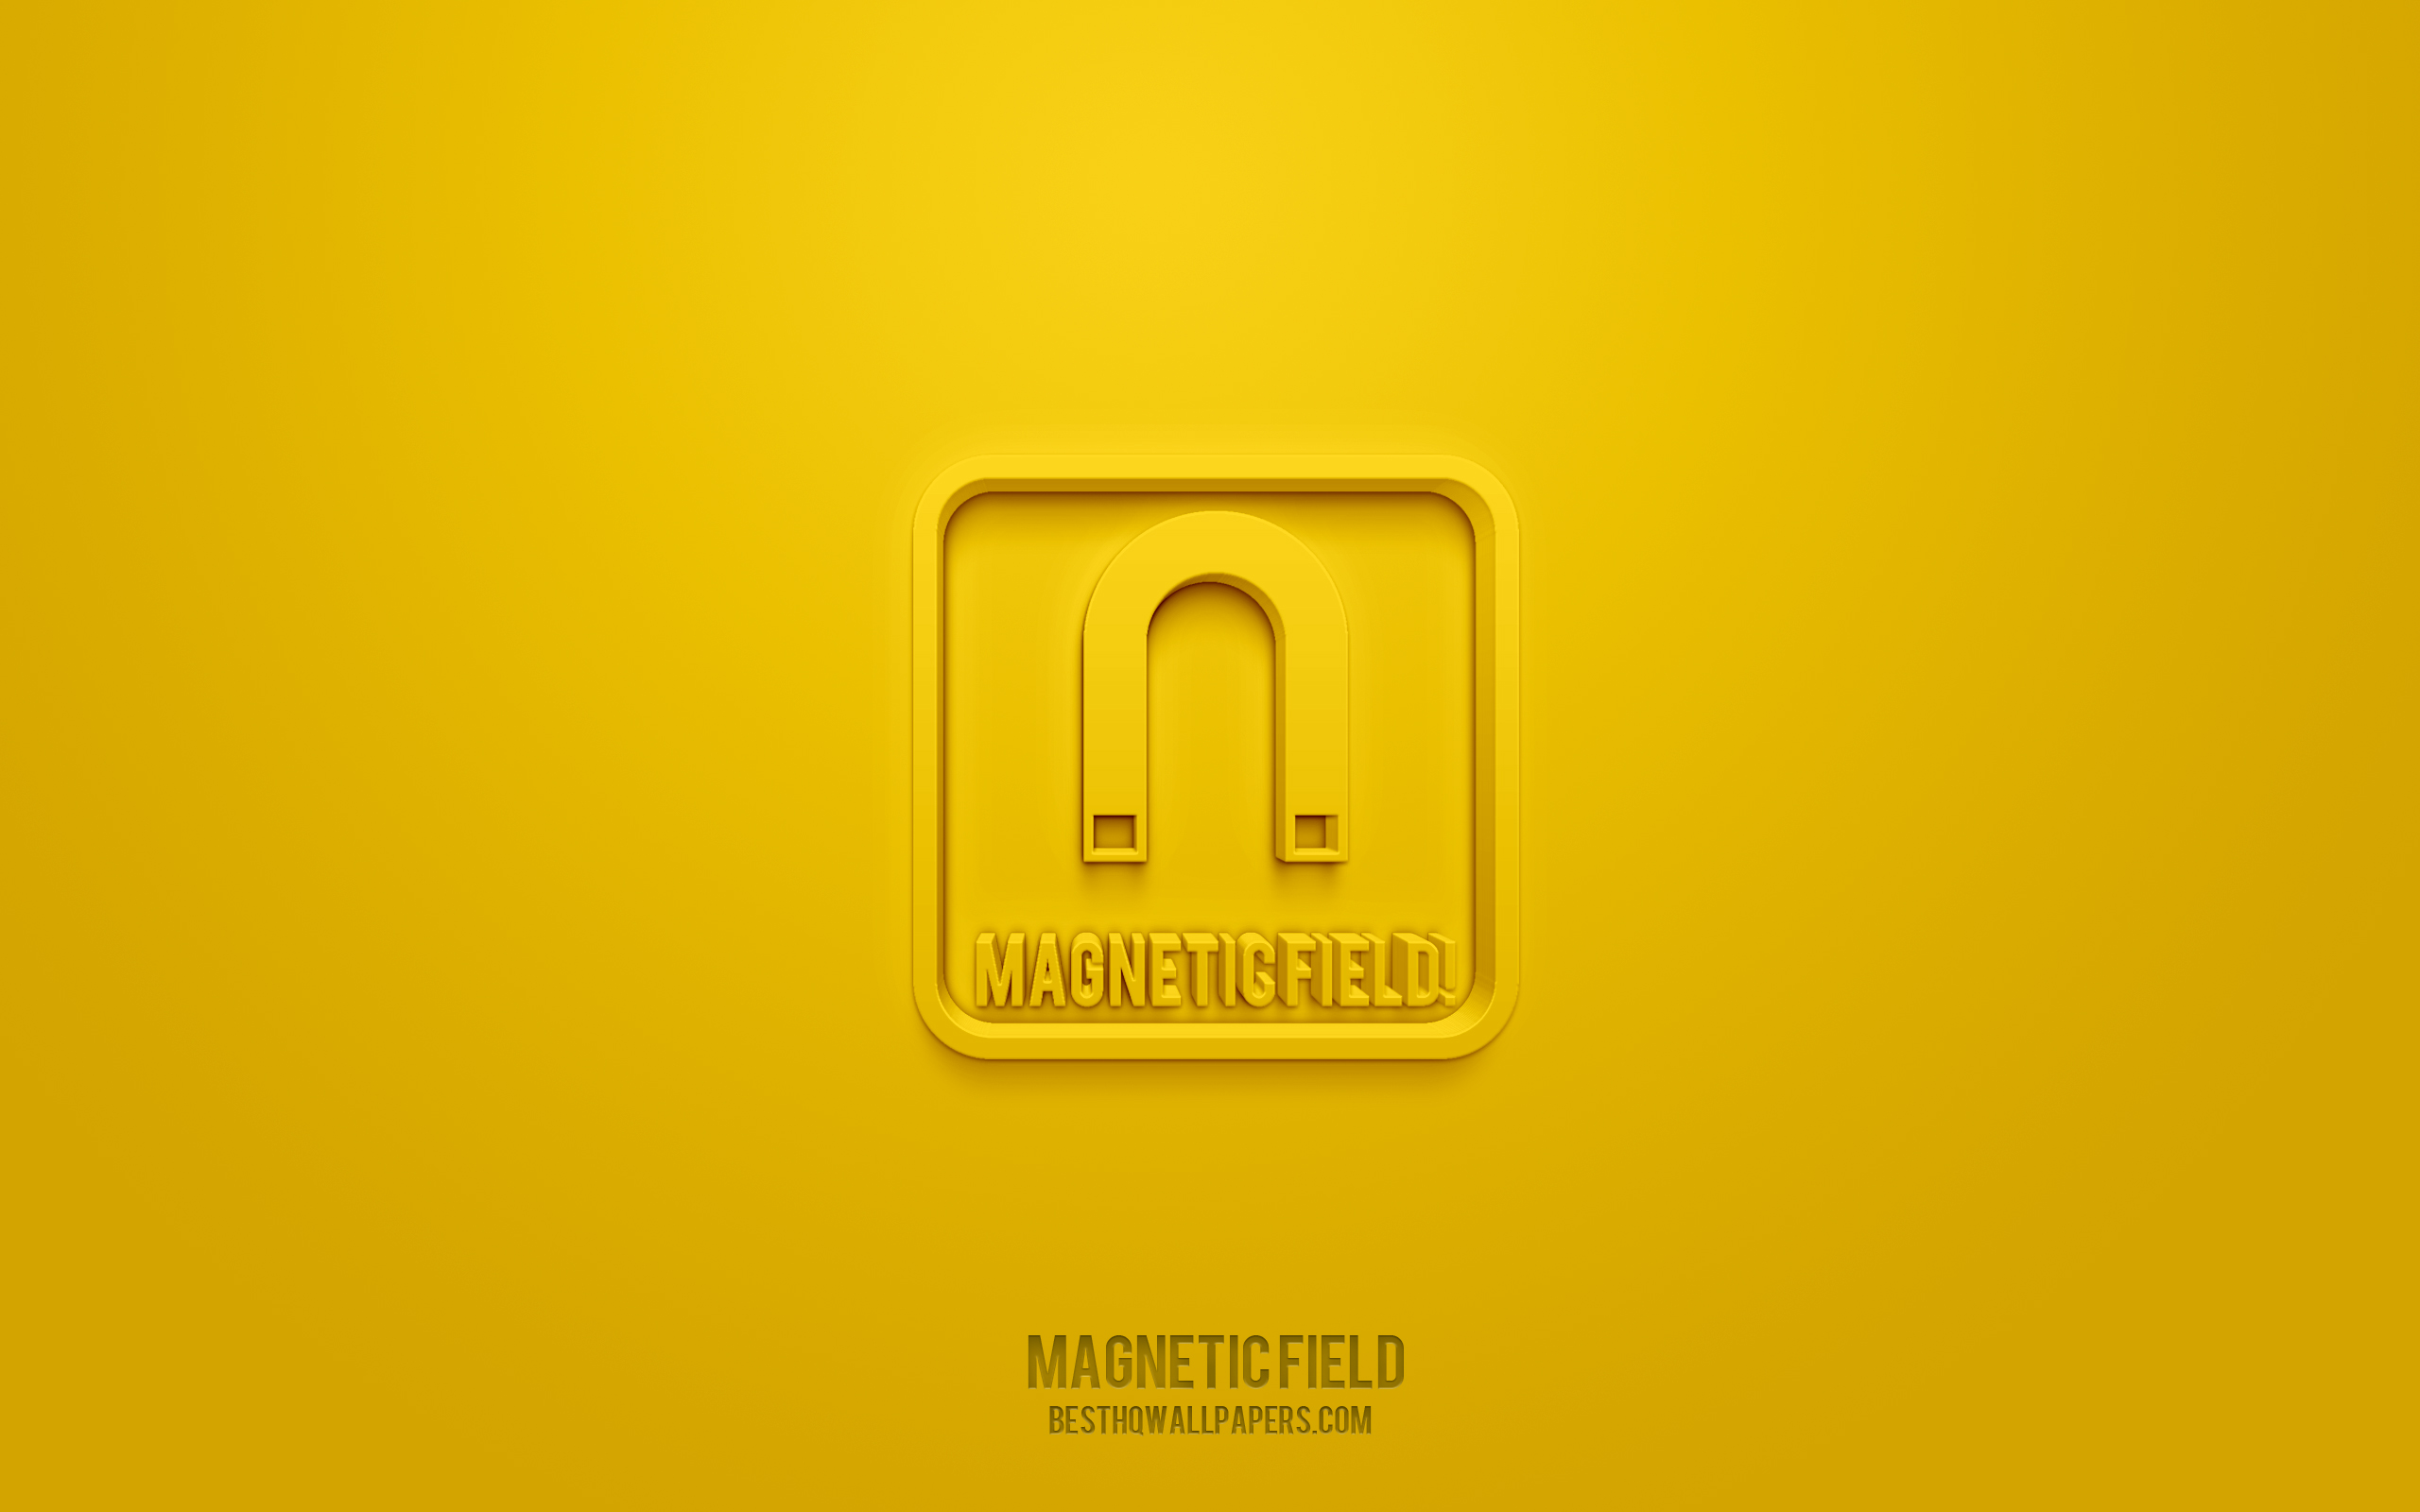 Download wallpaper Magnetic field 3D icon, yellow background, 3D symbols, Magnetic field, Warning icons, 3D icons, Magnetic field sign, Warning 3D icons, yellow warning signs for desktop with resolution 2560x1600. High Quality